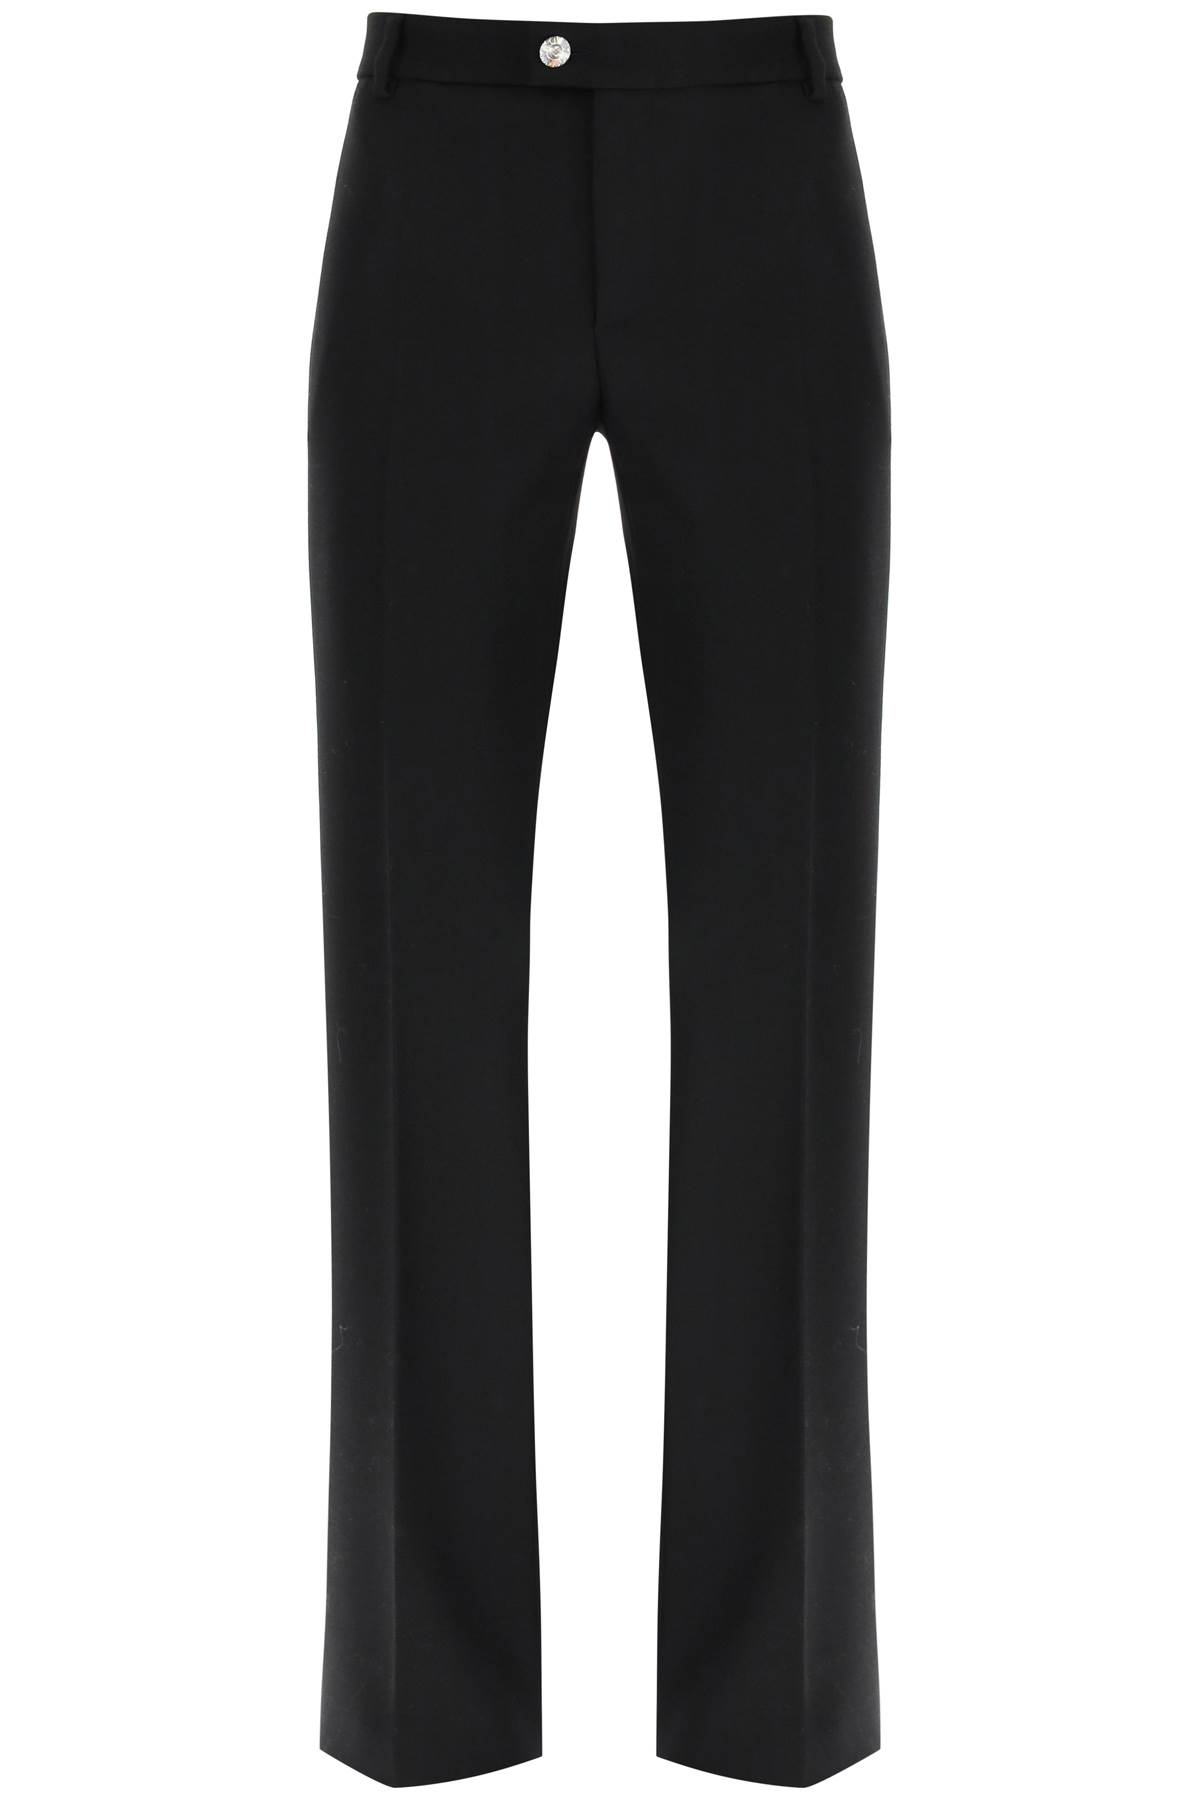 BLUMARINE WOOL TROUSERS WITH JEWEL BUTTON